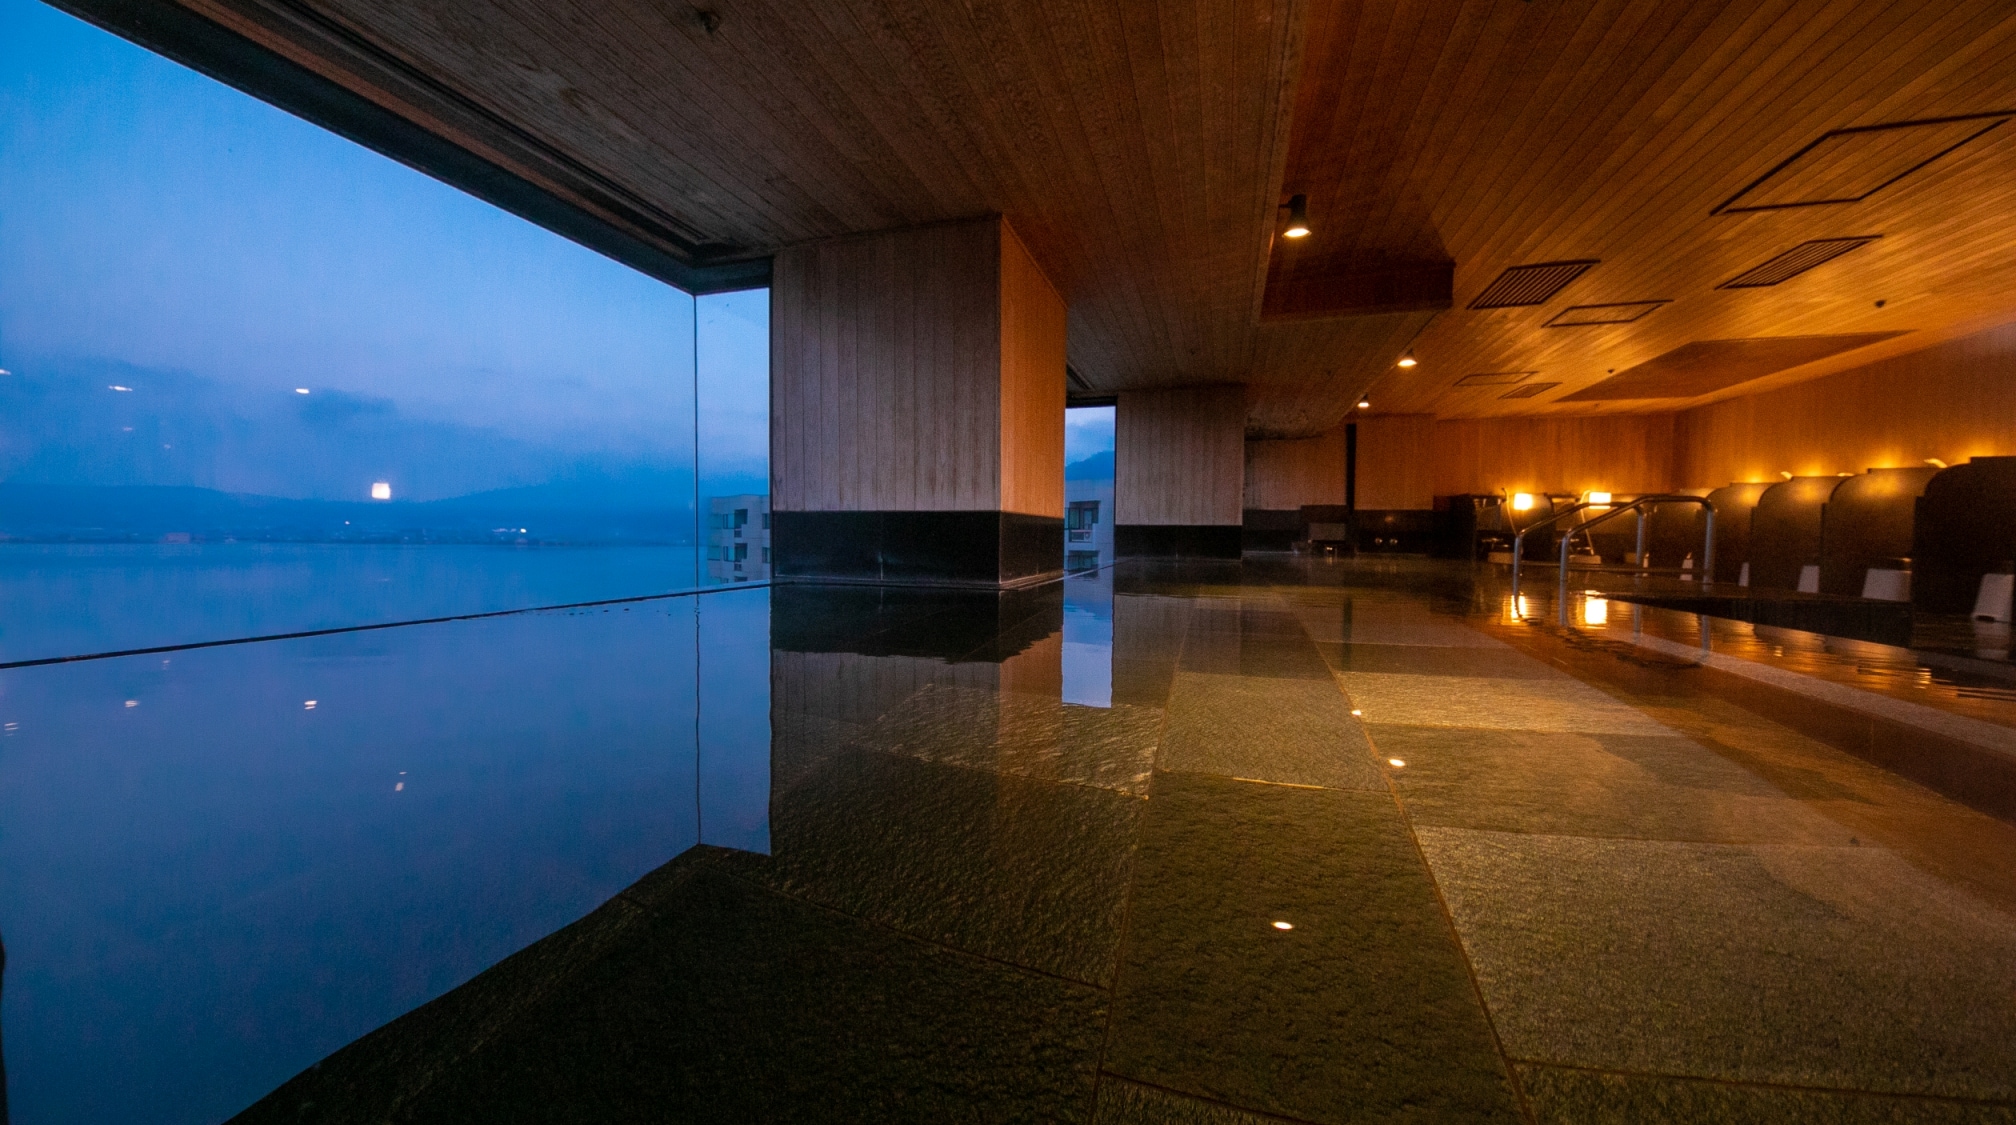 The 14th floor of the top floor "Lake Sky Hot Spring" The magnificent view of Shinshu spreads all over the window.